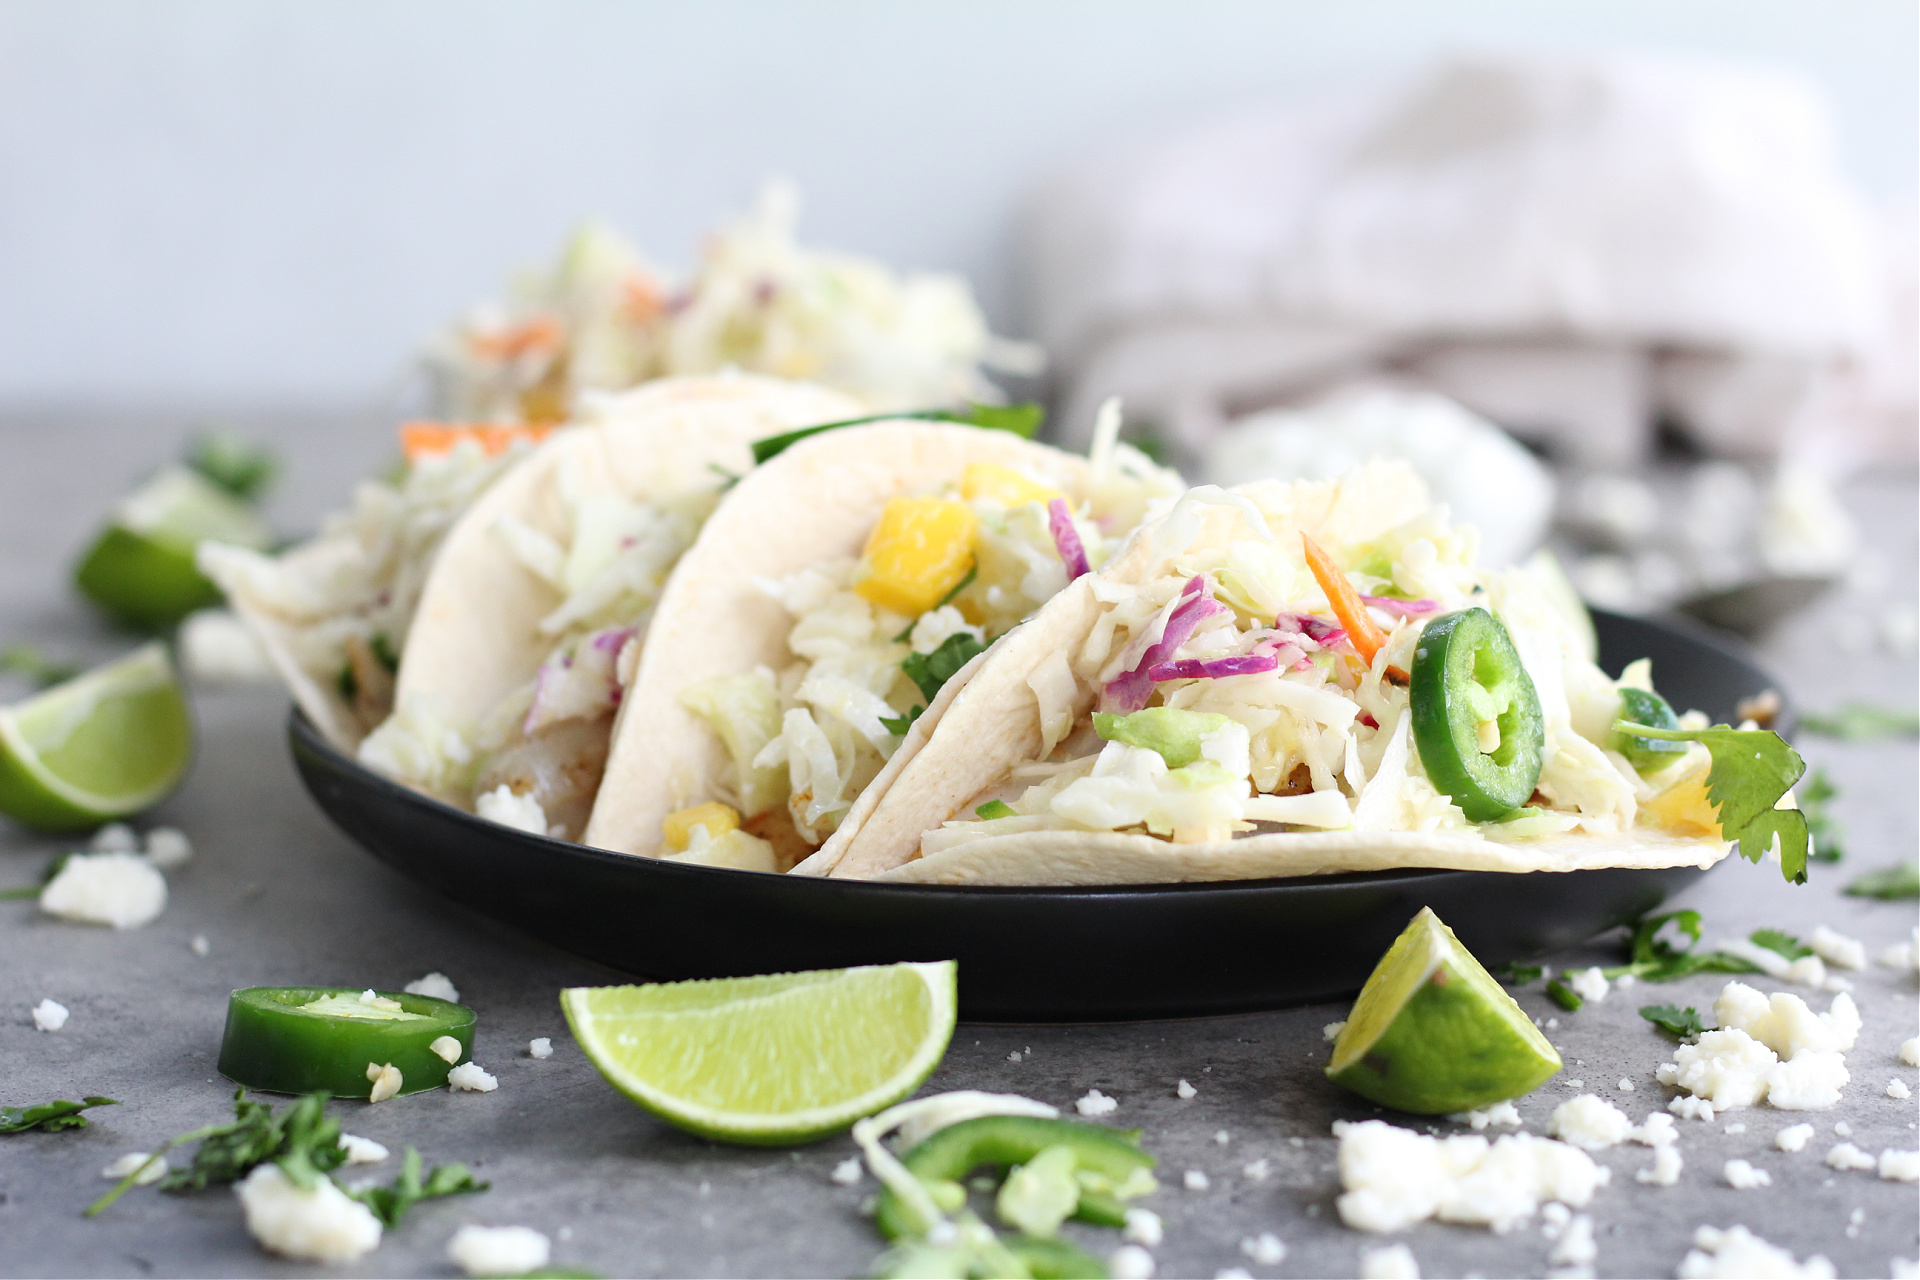 How To Make The Best Fish Tacos